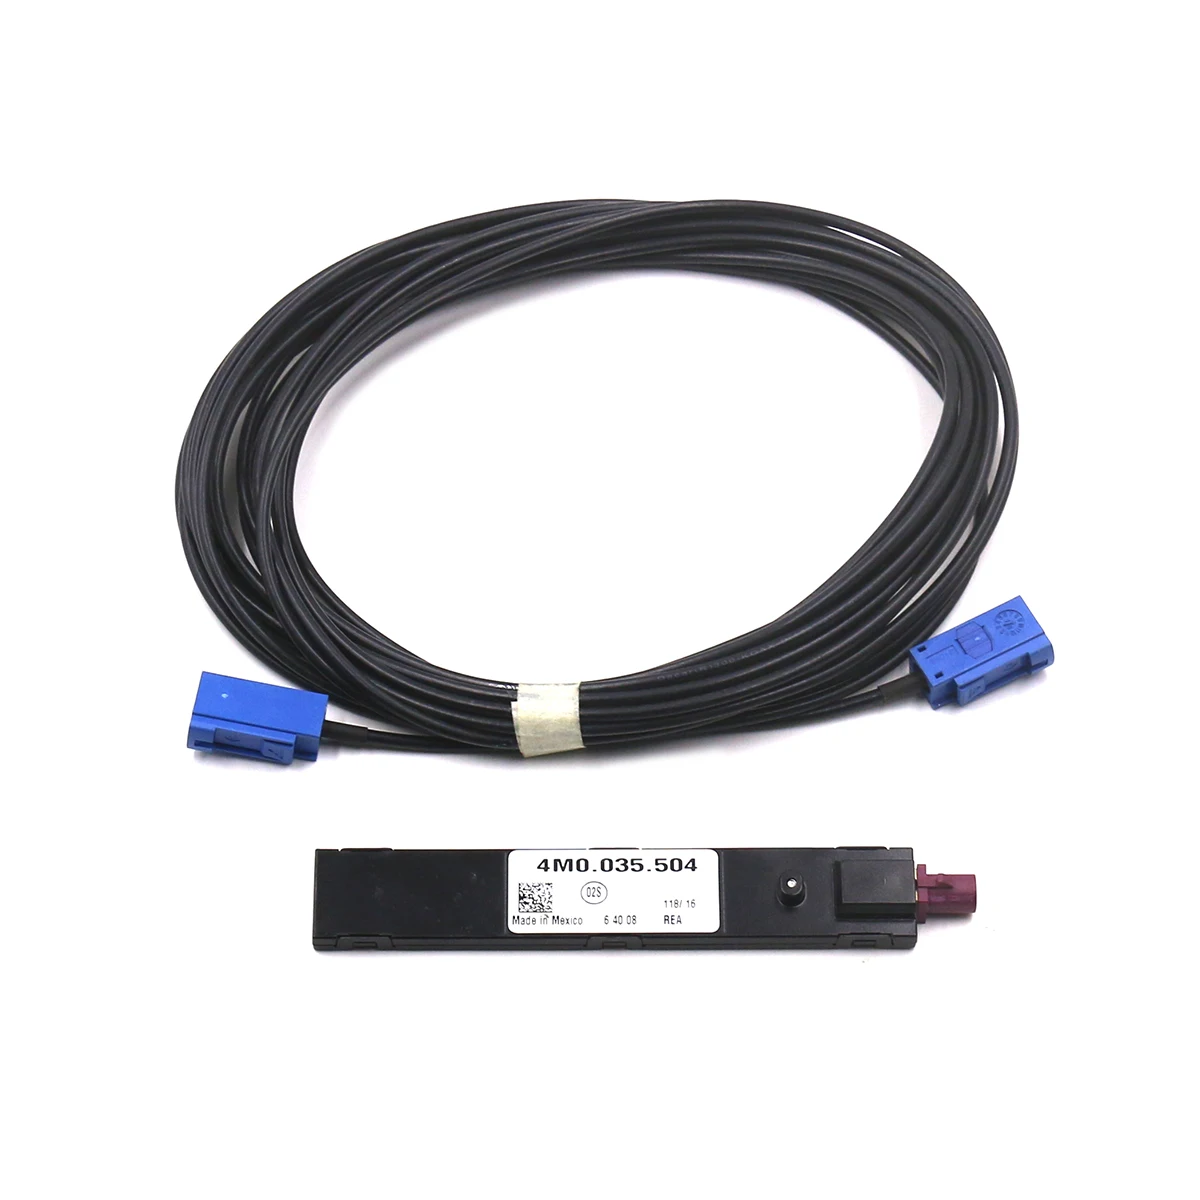 FOR VW Audi MIB UNIT GSM ANTENNA FOR PREMIUM Bluetooth-compatible Cell phone signal amplifier